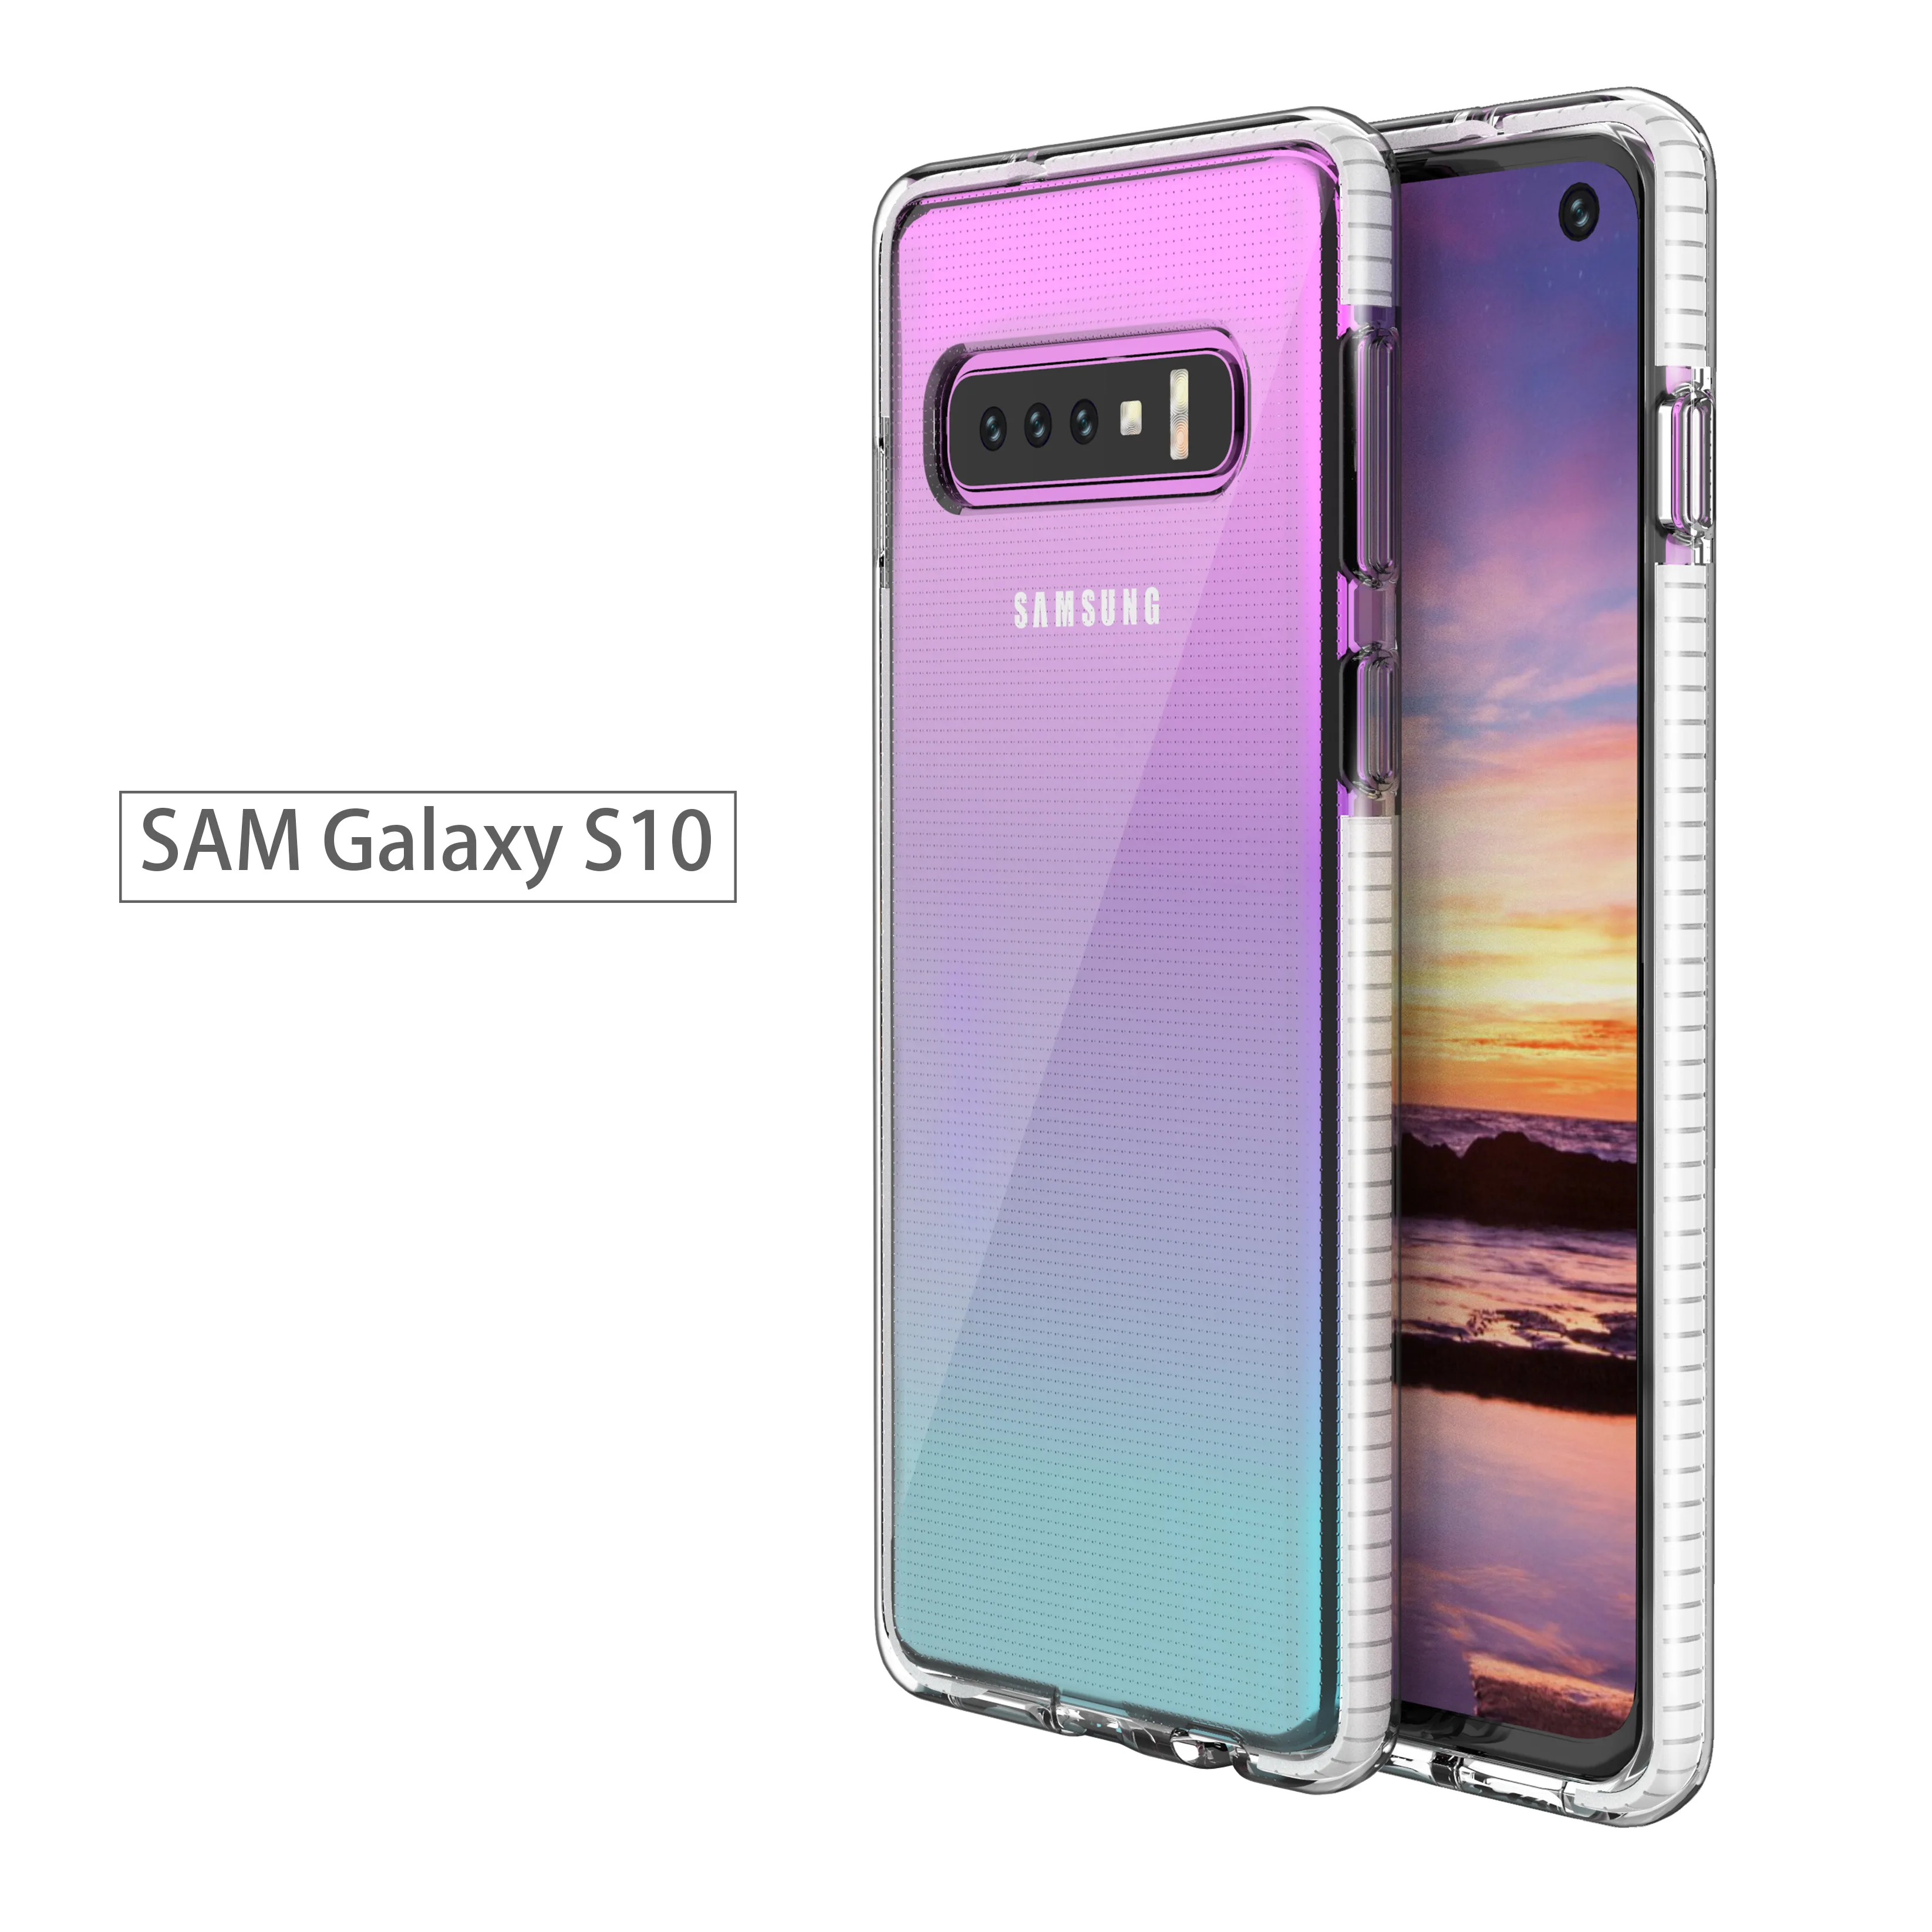 Hot Sellers 360 Degree Protective Tpu Case For Samsung S10 Plus Case Wholesale For Samsung S10 Tpu Case Buy Phone Case For Smsung S10 S10e S10plus The Equipment For Manufacture Of Covers For